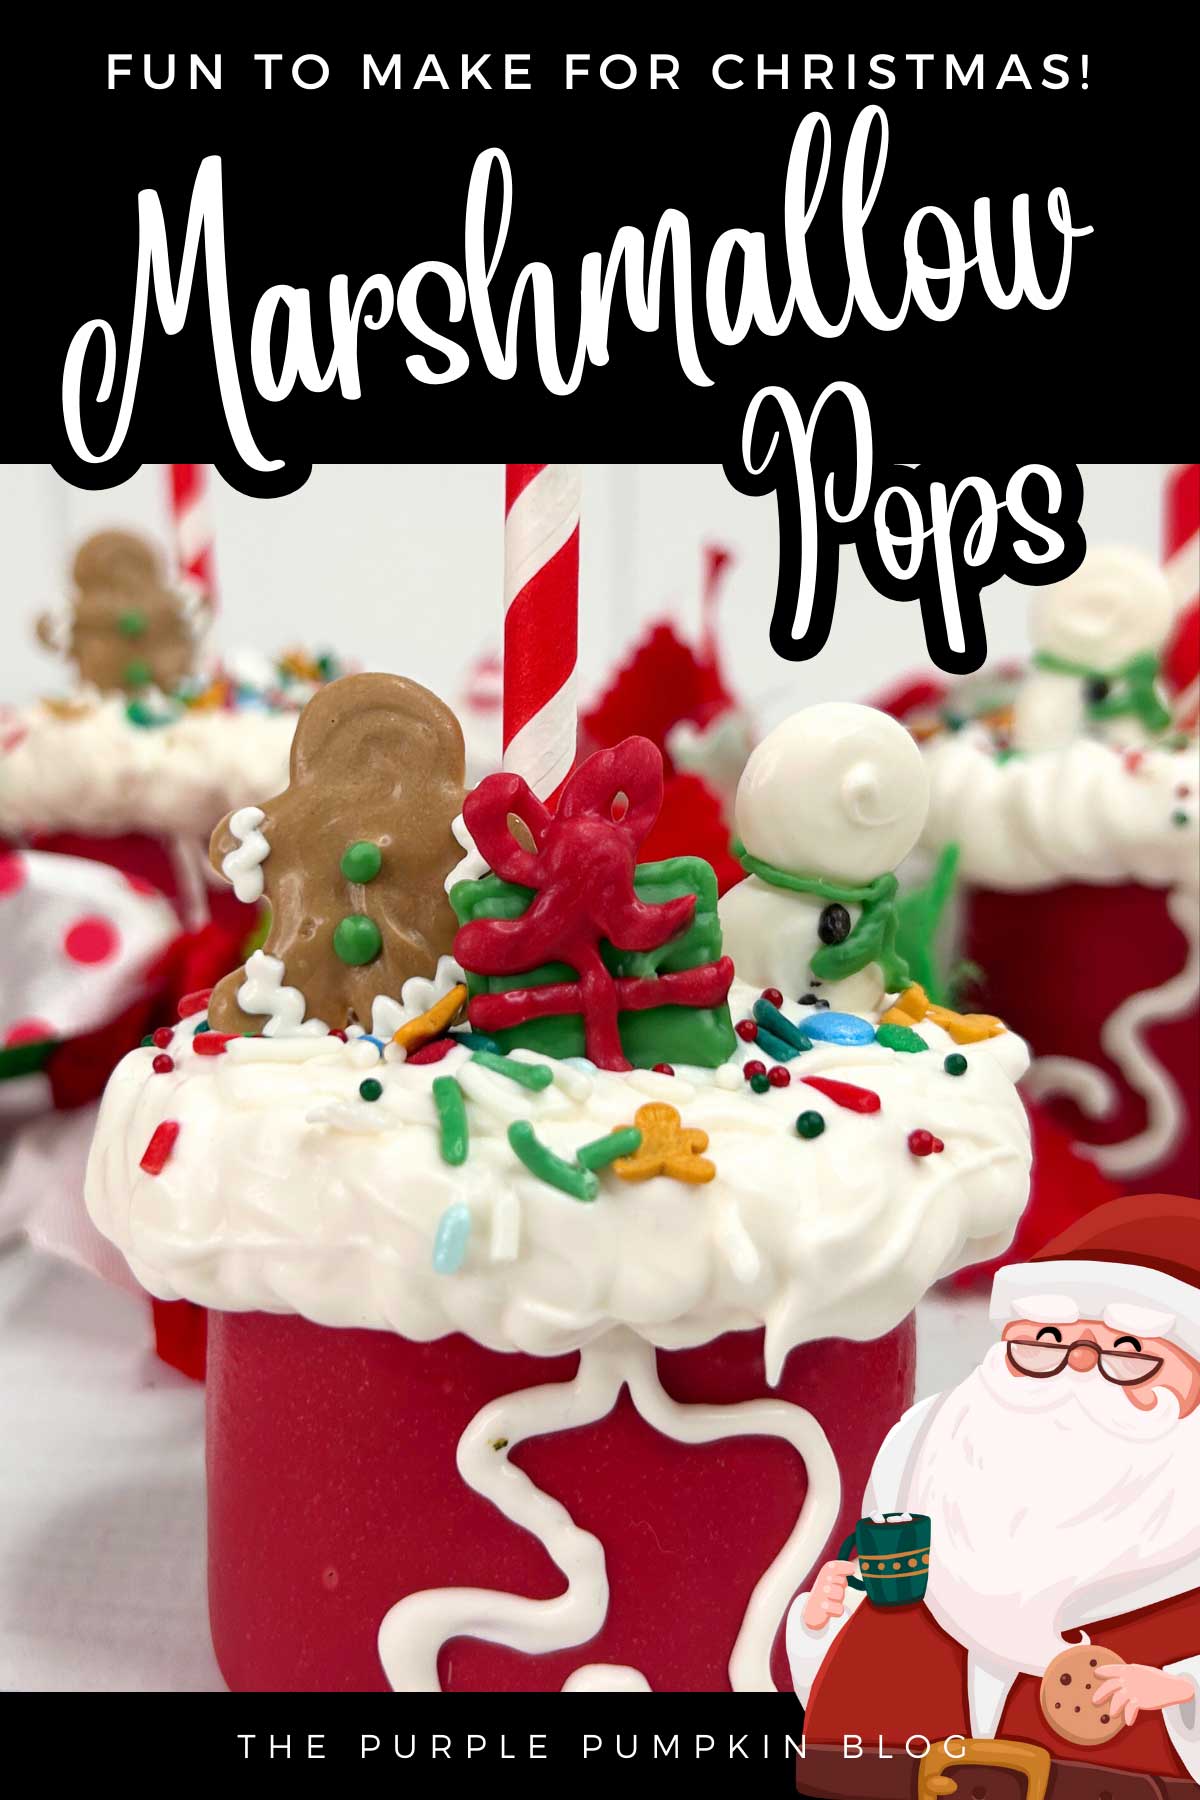 A giant marshmallow, dipped in red candy melts with a red-and-white striped straw inserted. The marshmallow is decorated with melted white candy to resemble snow, and topped with festive sprinkles, and a gingerbread man and Christmas gift made from melted candy. More decorated marshmallows are in the background.